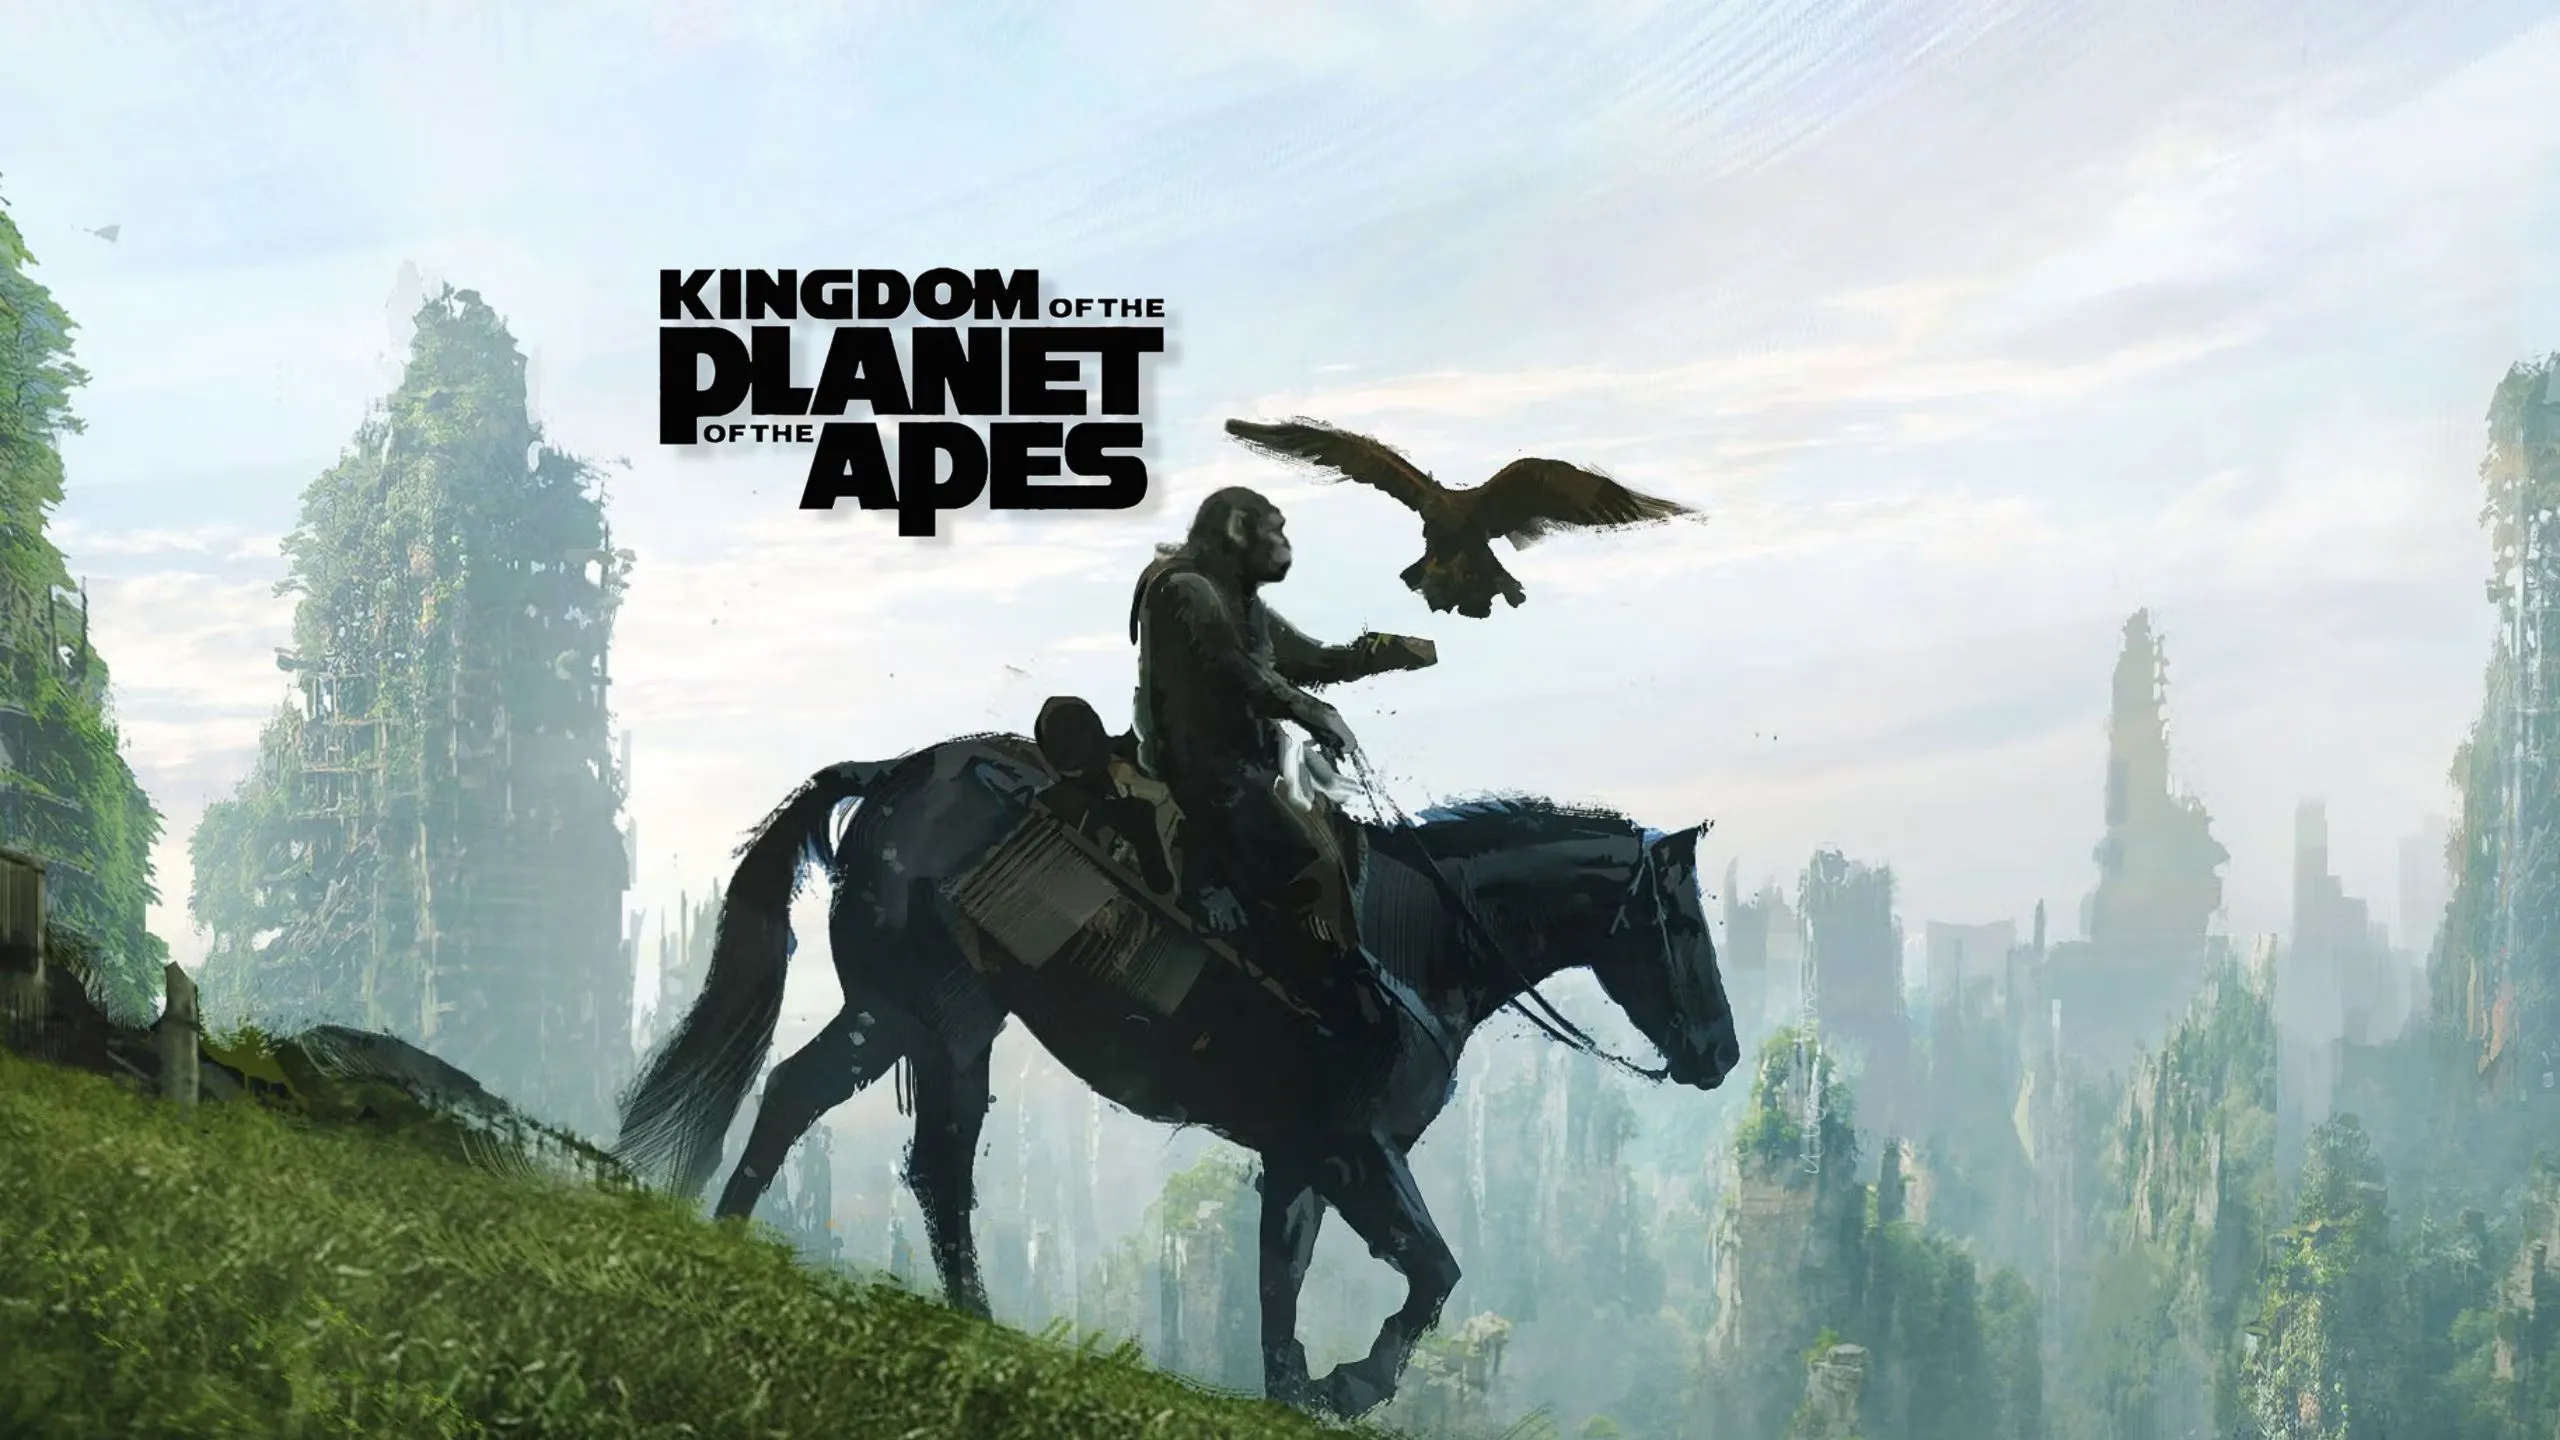 kingdom of the planet of the apes 2024